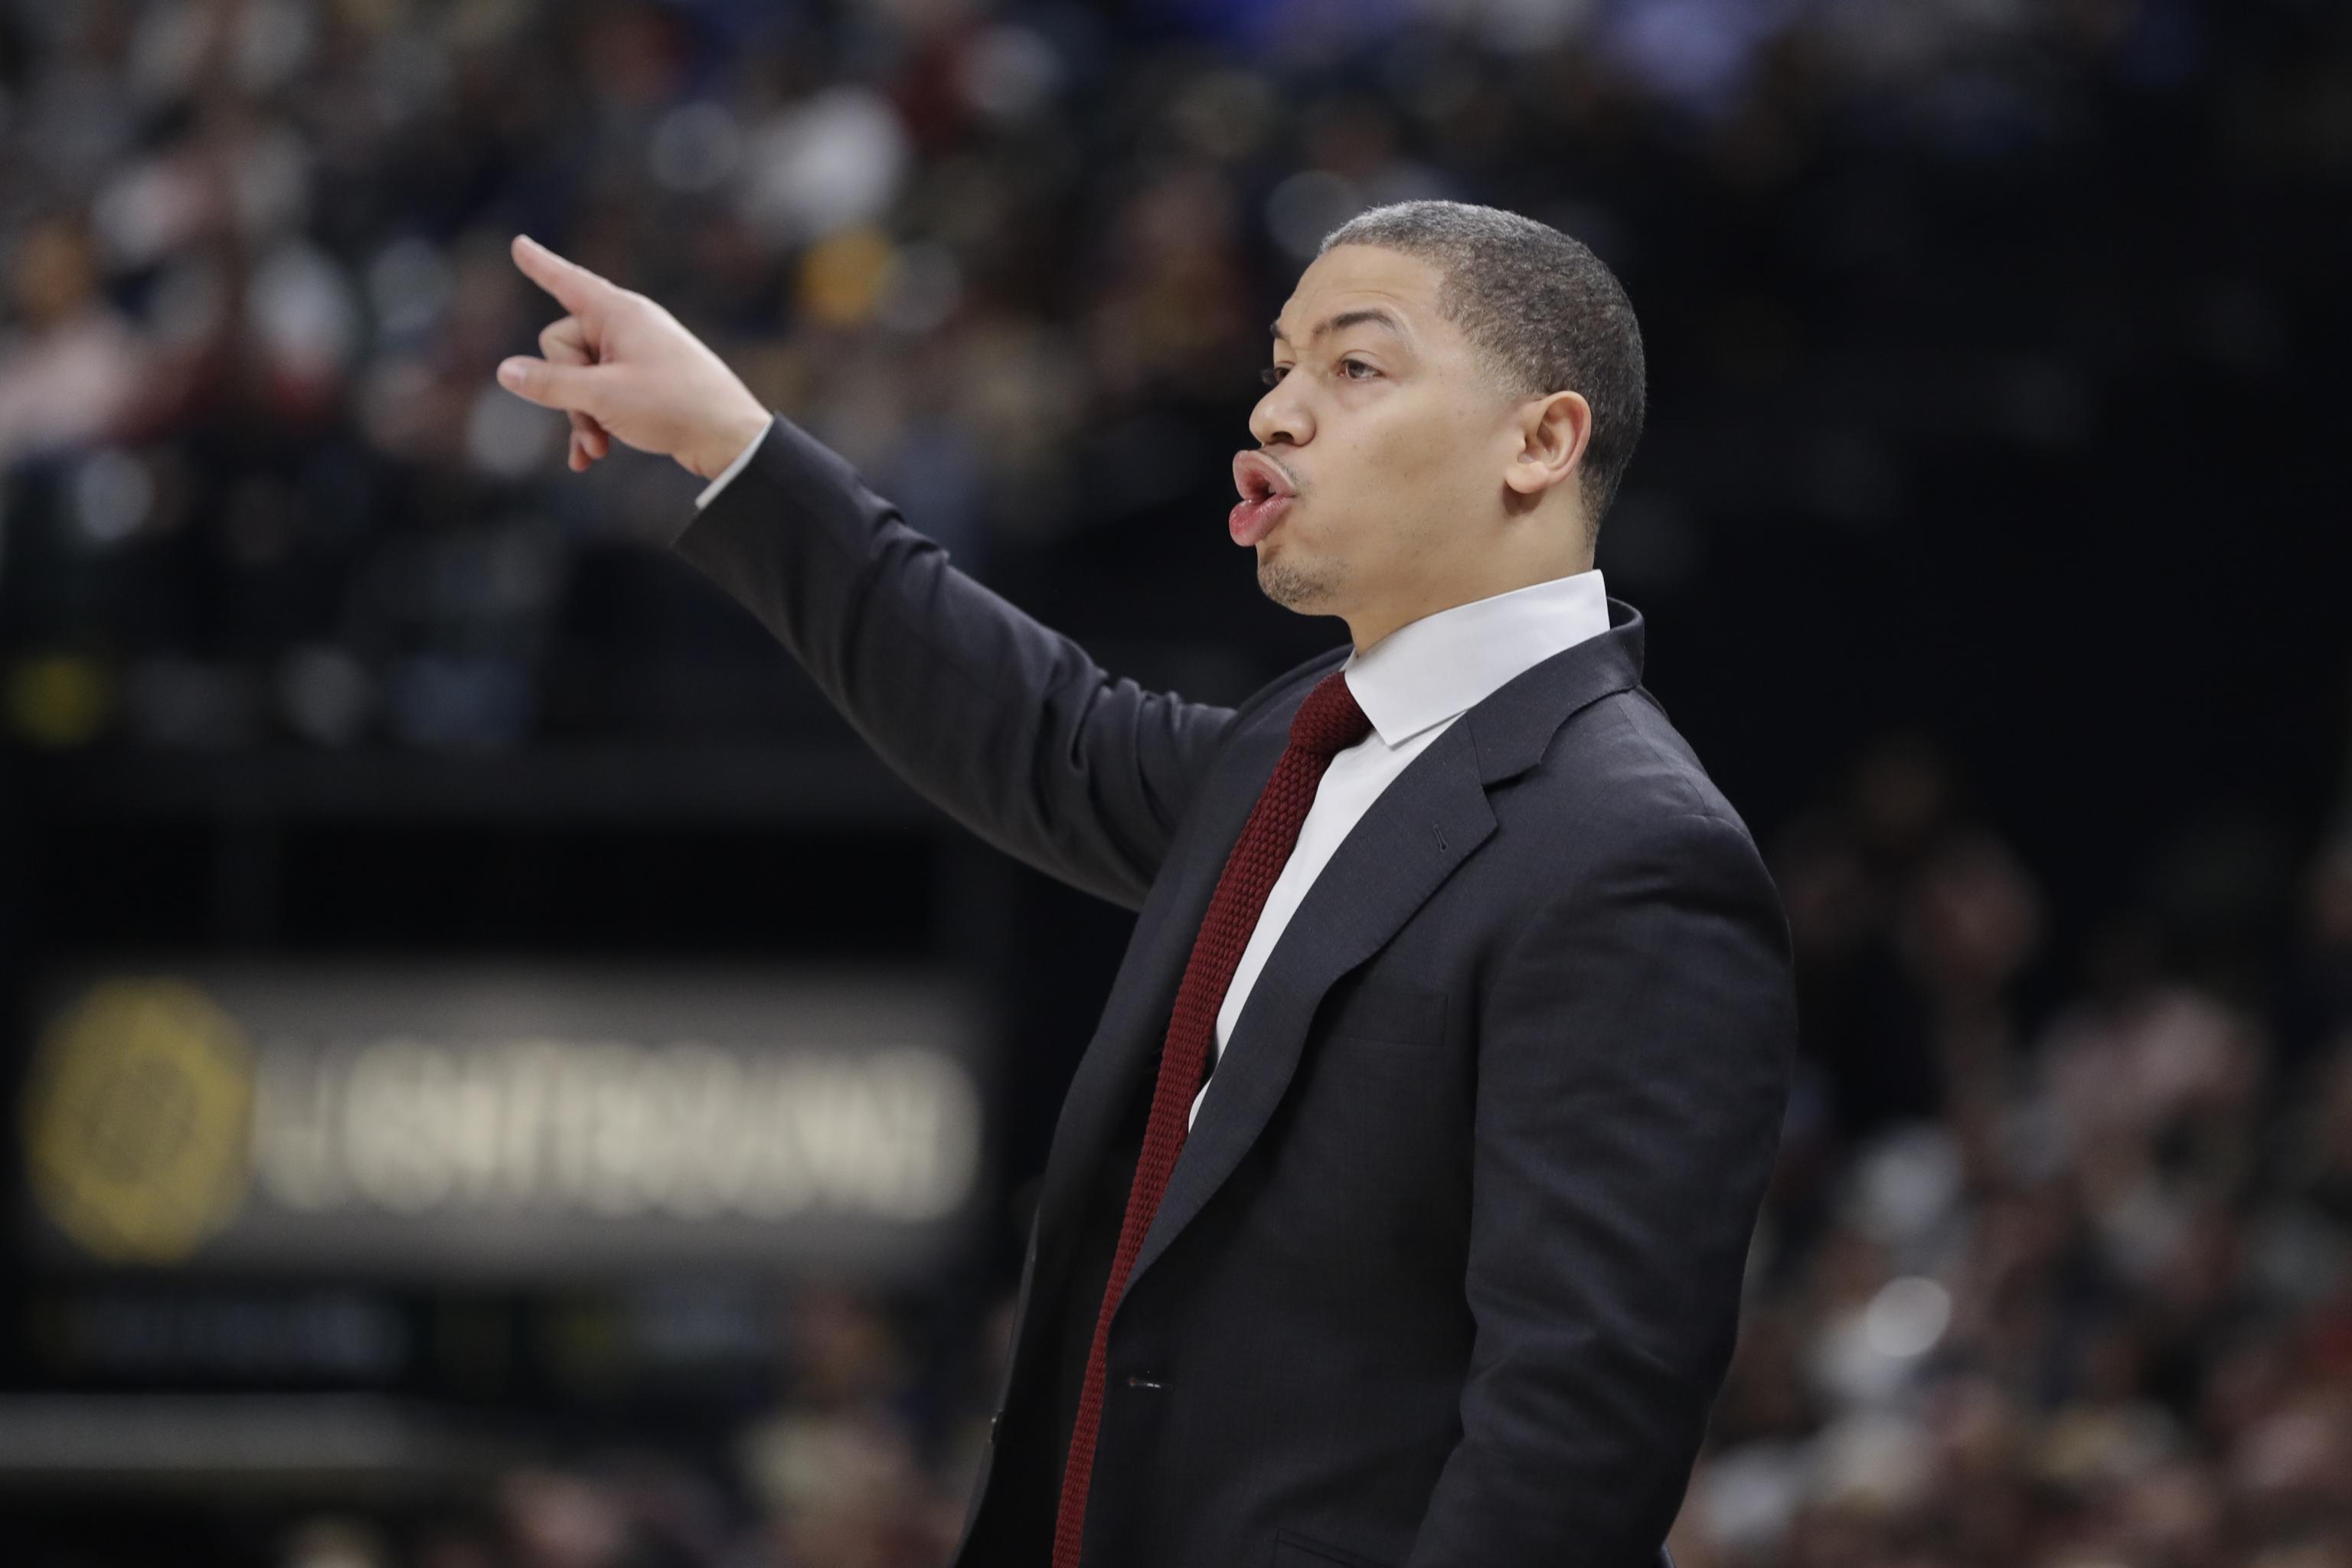 The unique dynamic between LeBron James and Cavs coach Tyronn Lue